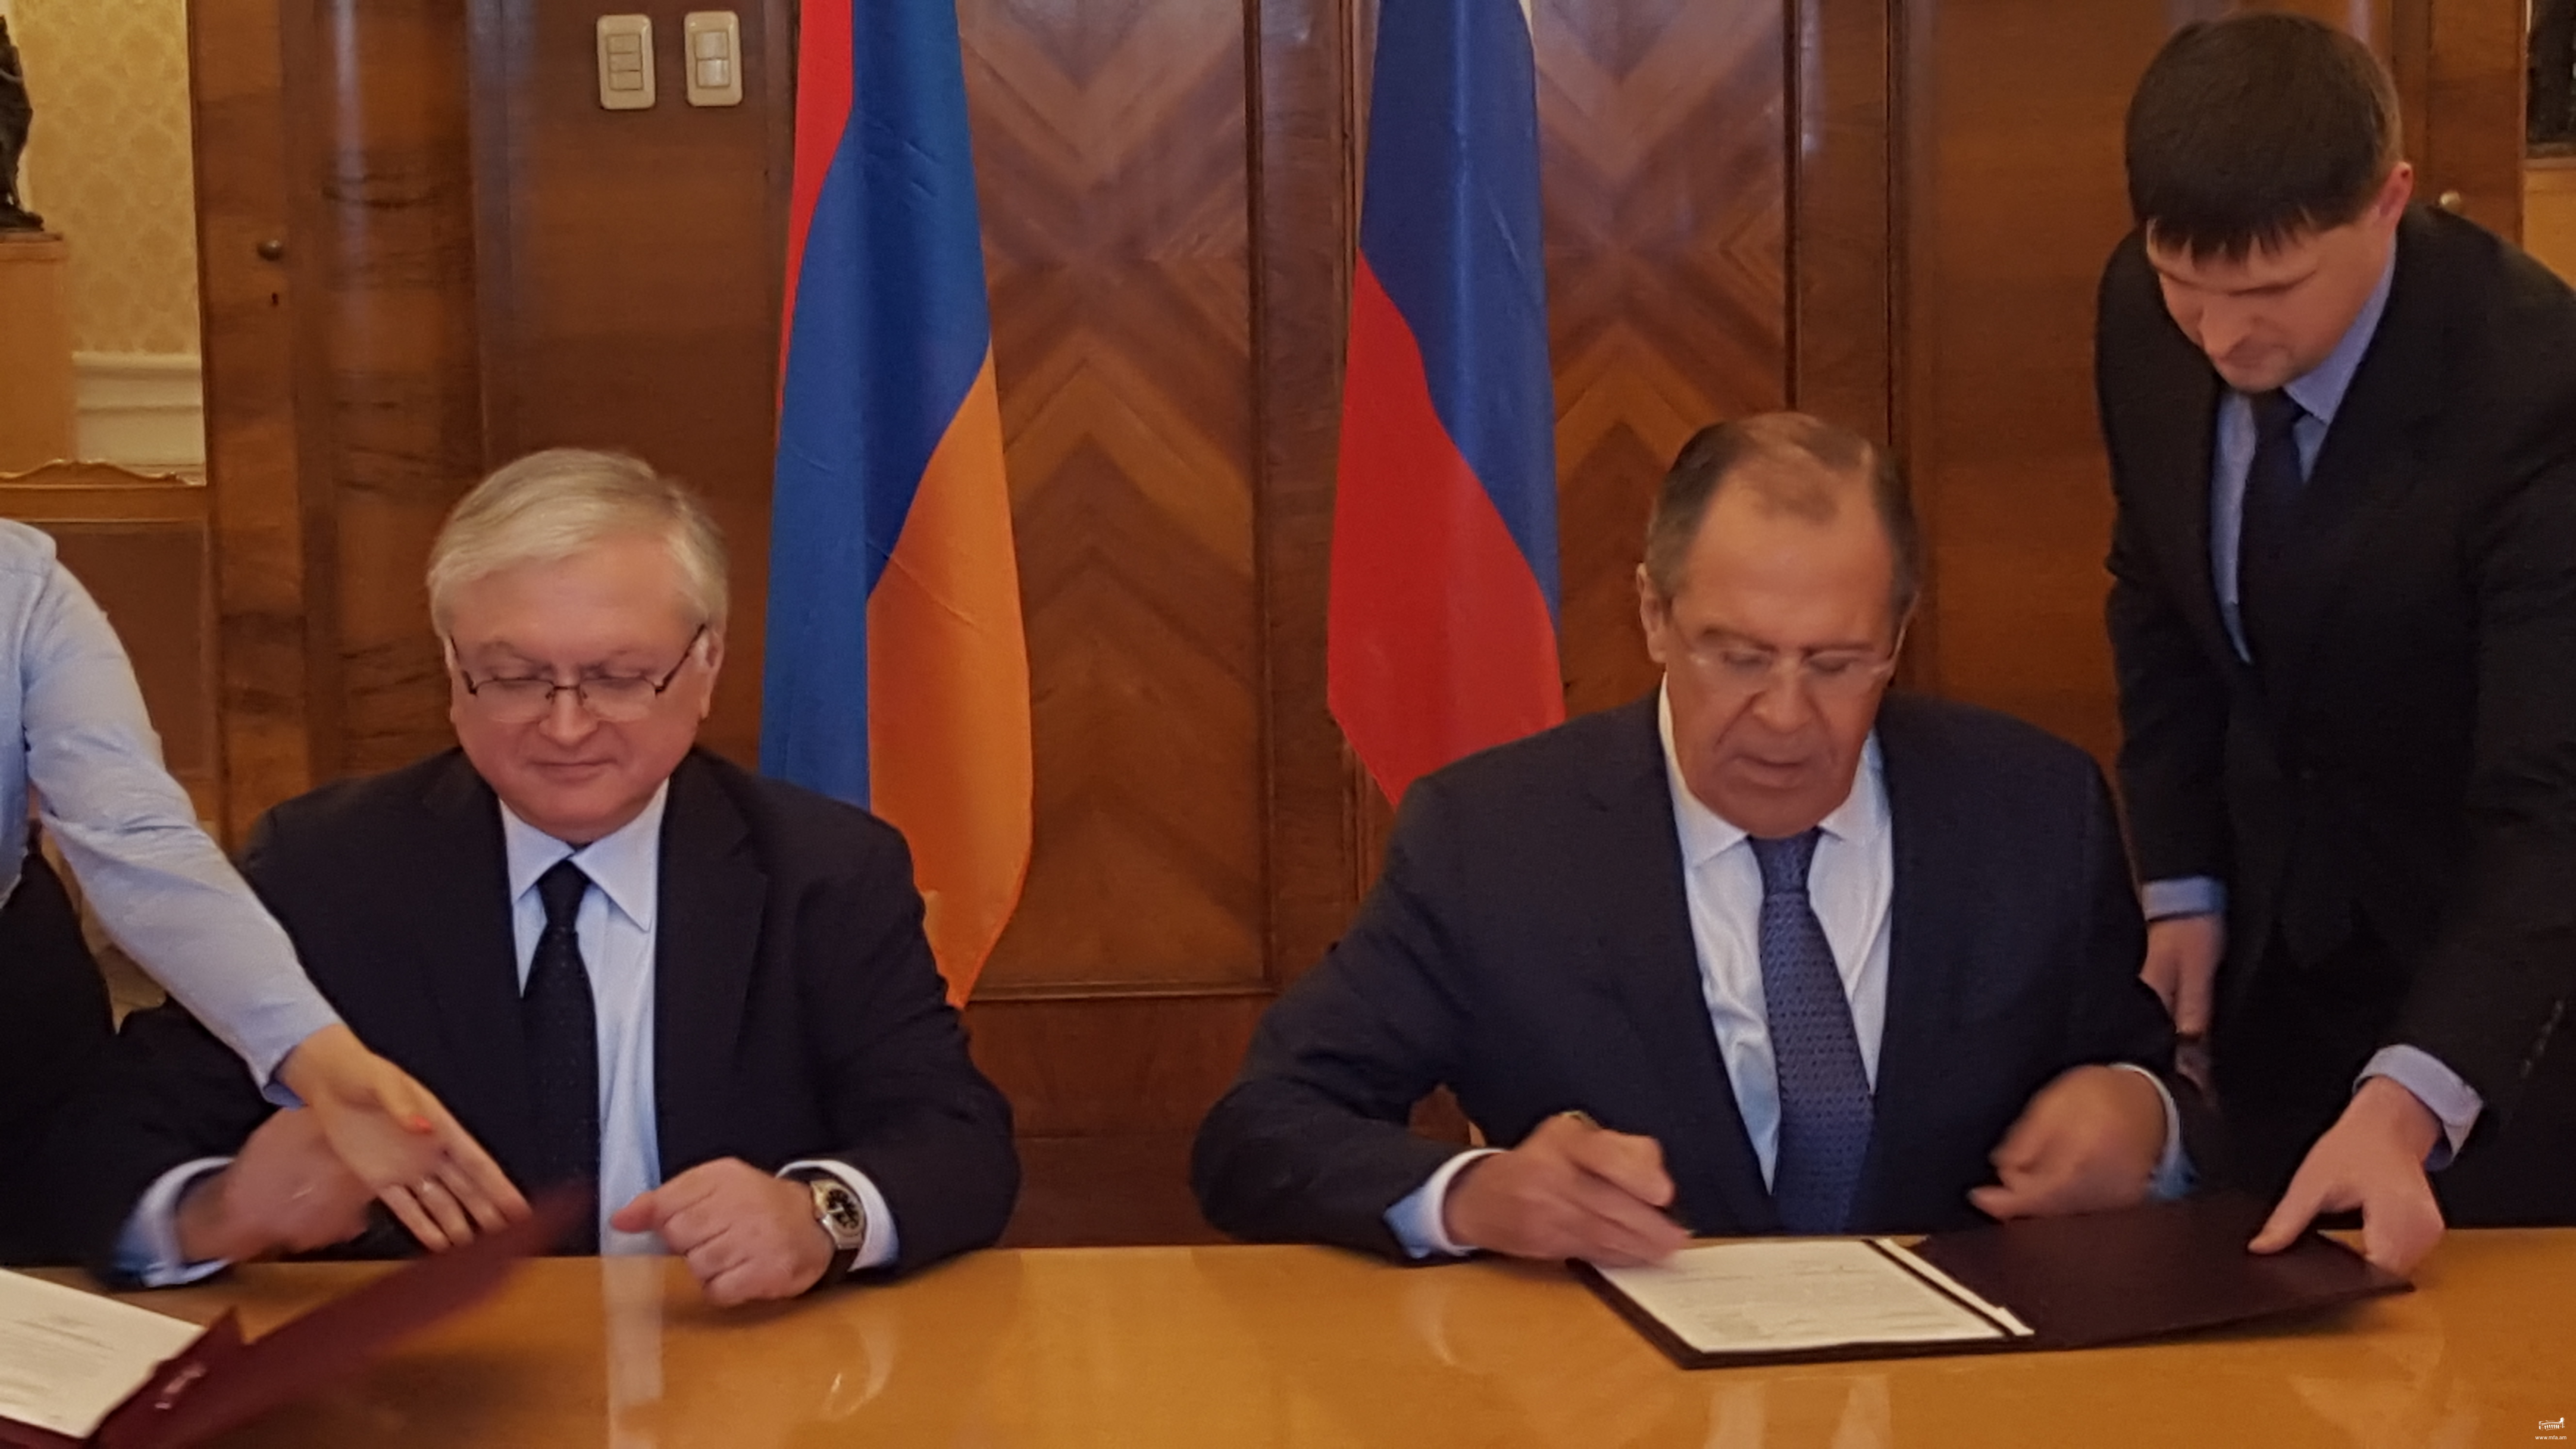 Meeting of the Foreign Ministers of Armenia and Russia